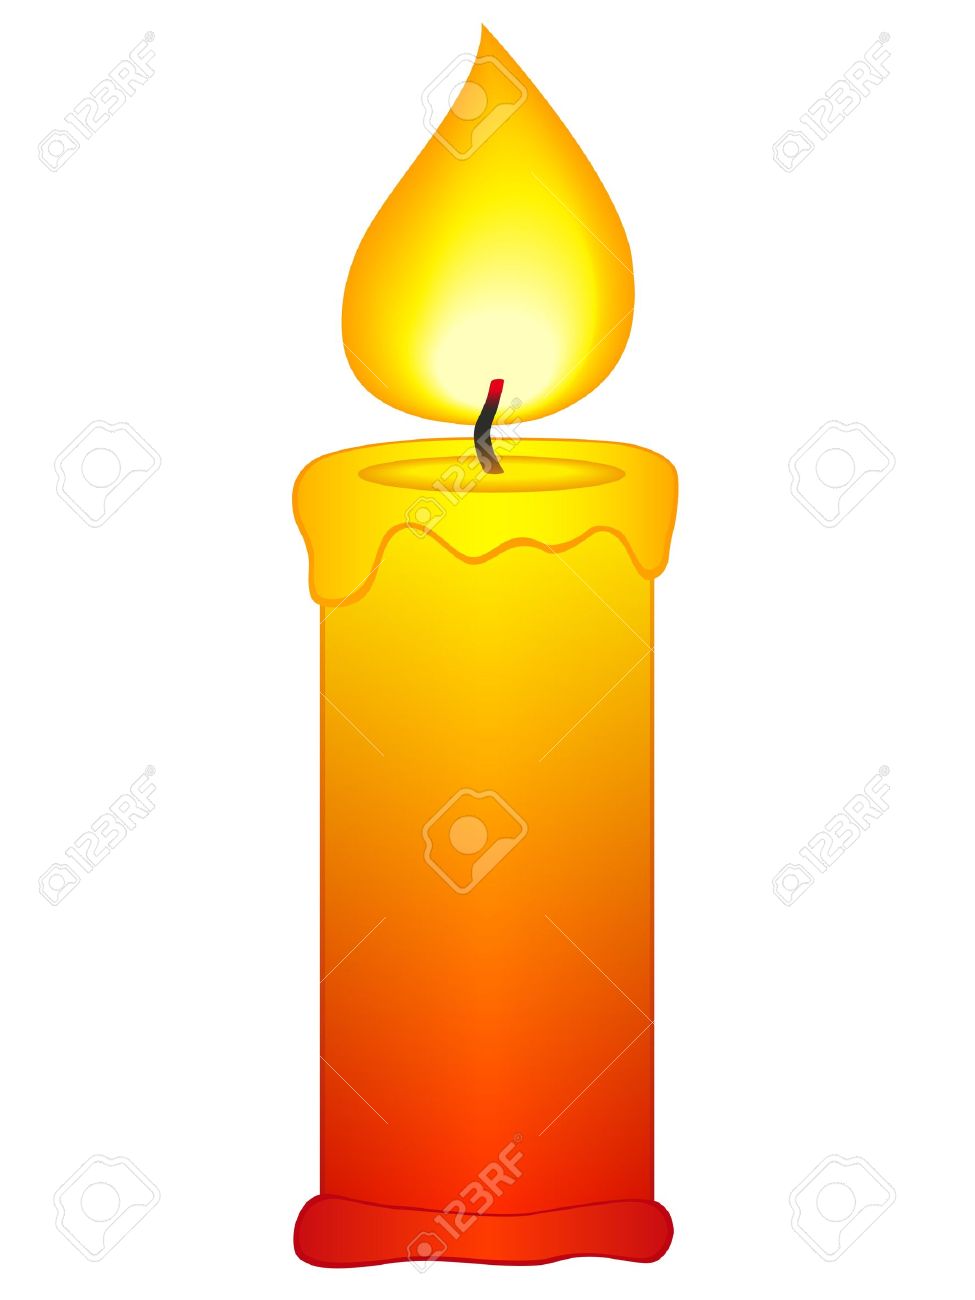 candle flame: Candle icon on a .